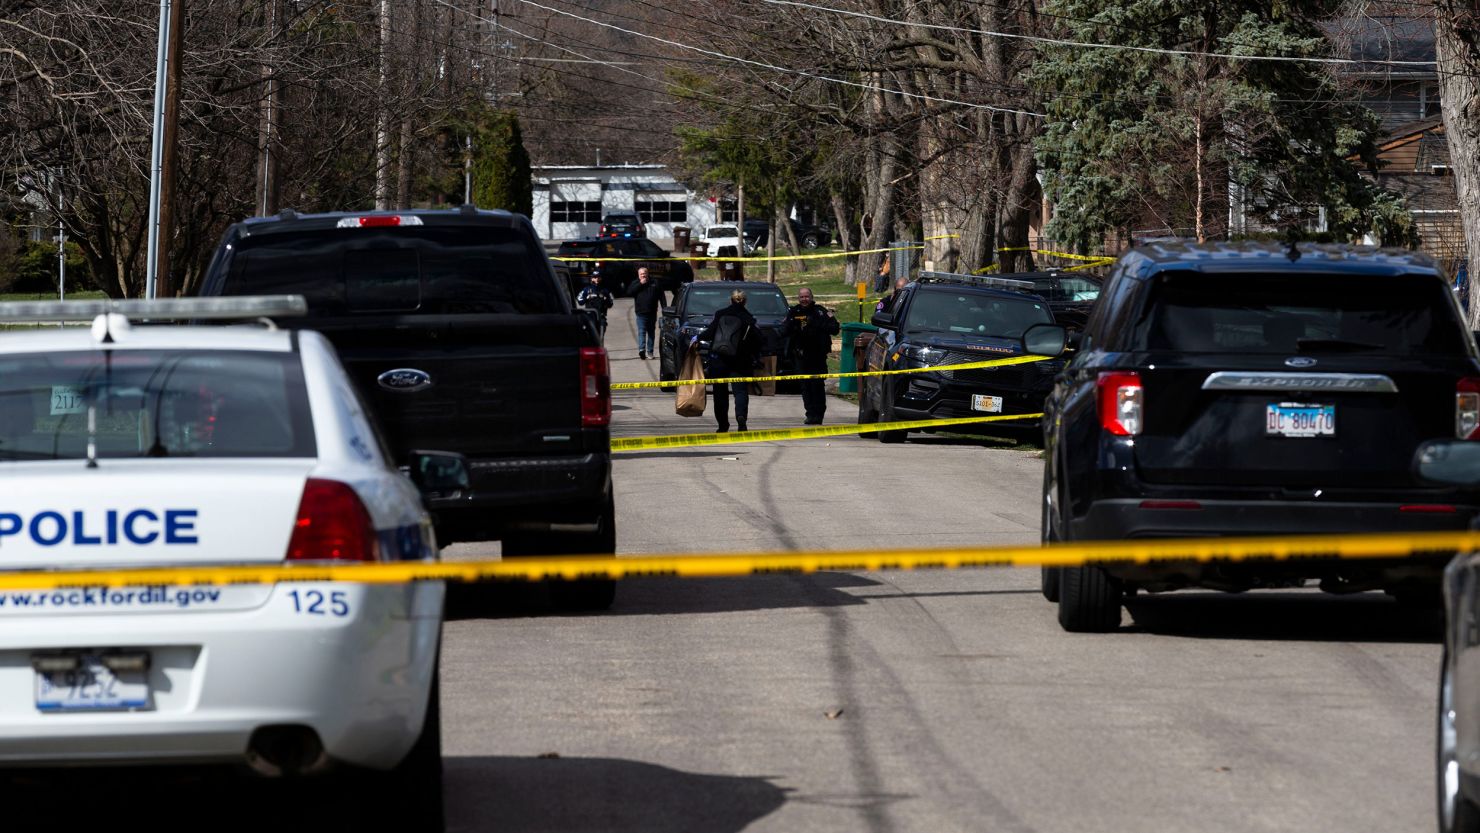 Law enforcement officers work a crime scene on Wednesday, March 27, in Rockford, Illinois.